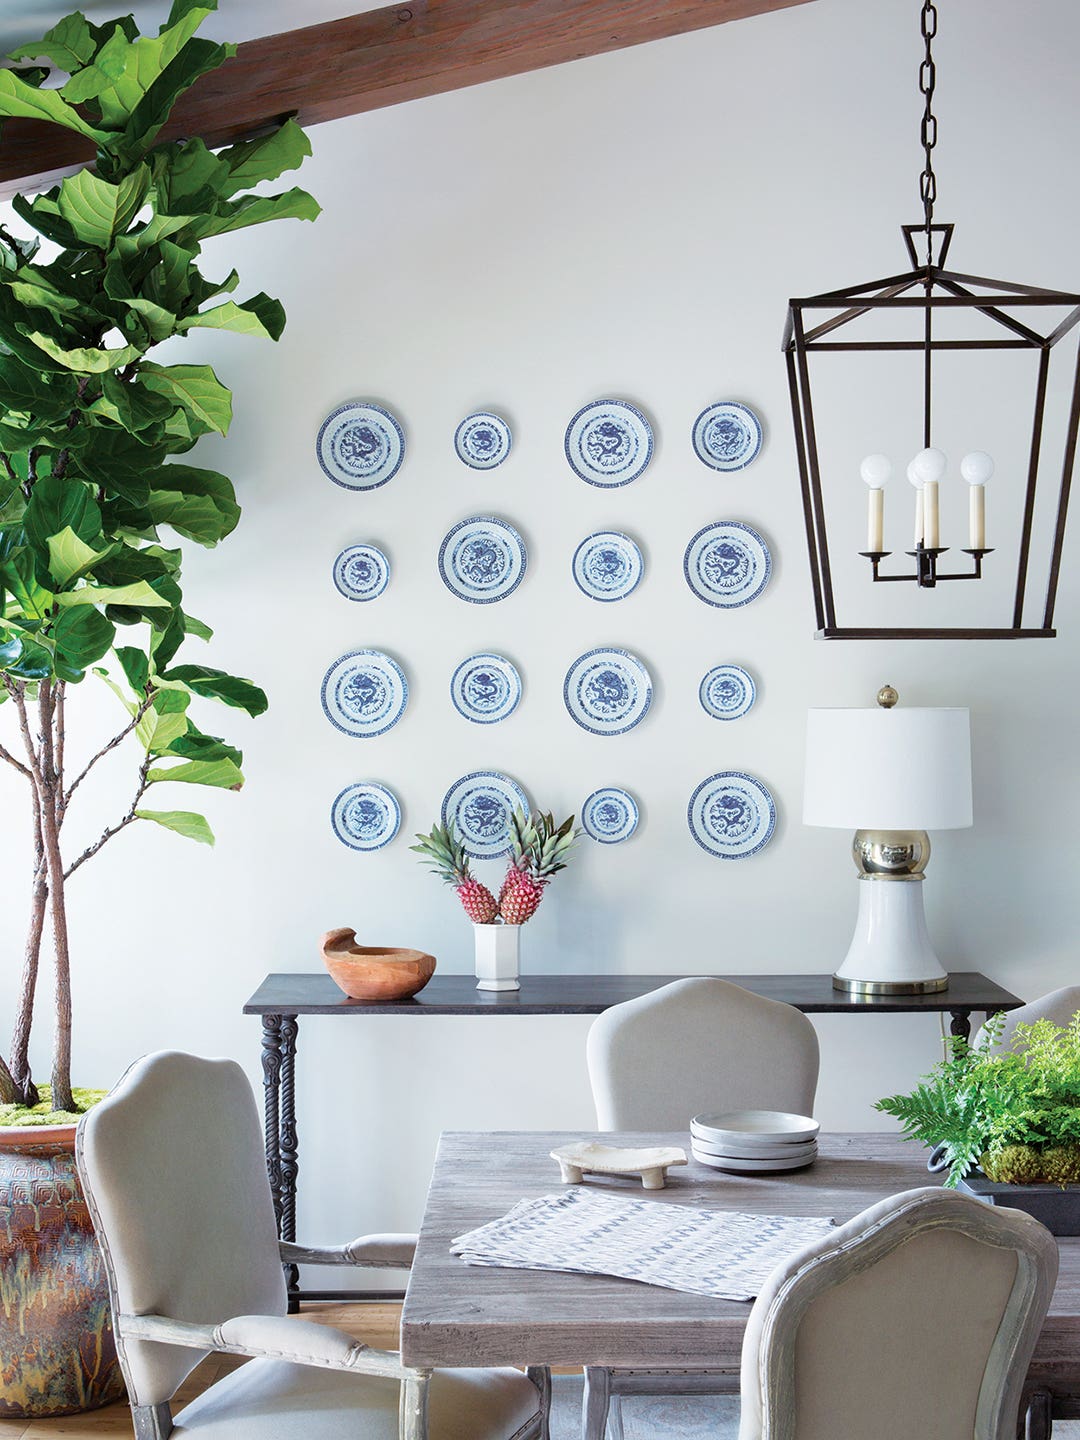 Gallery Walls Are Cool, But Do You Have a Plate Wall?